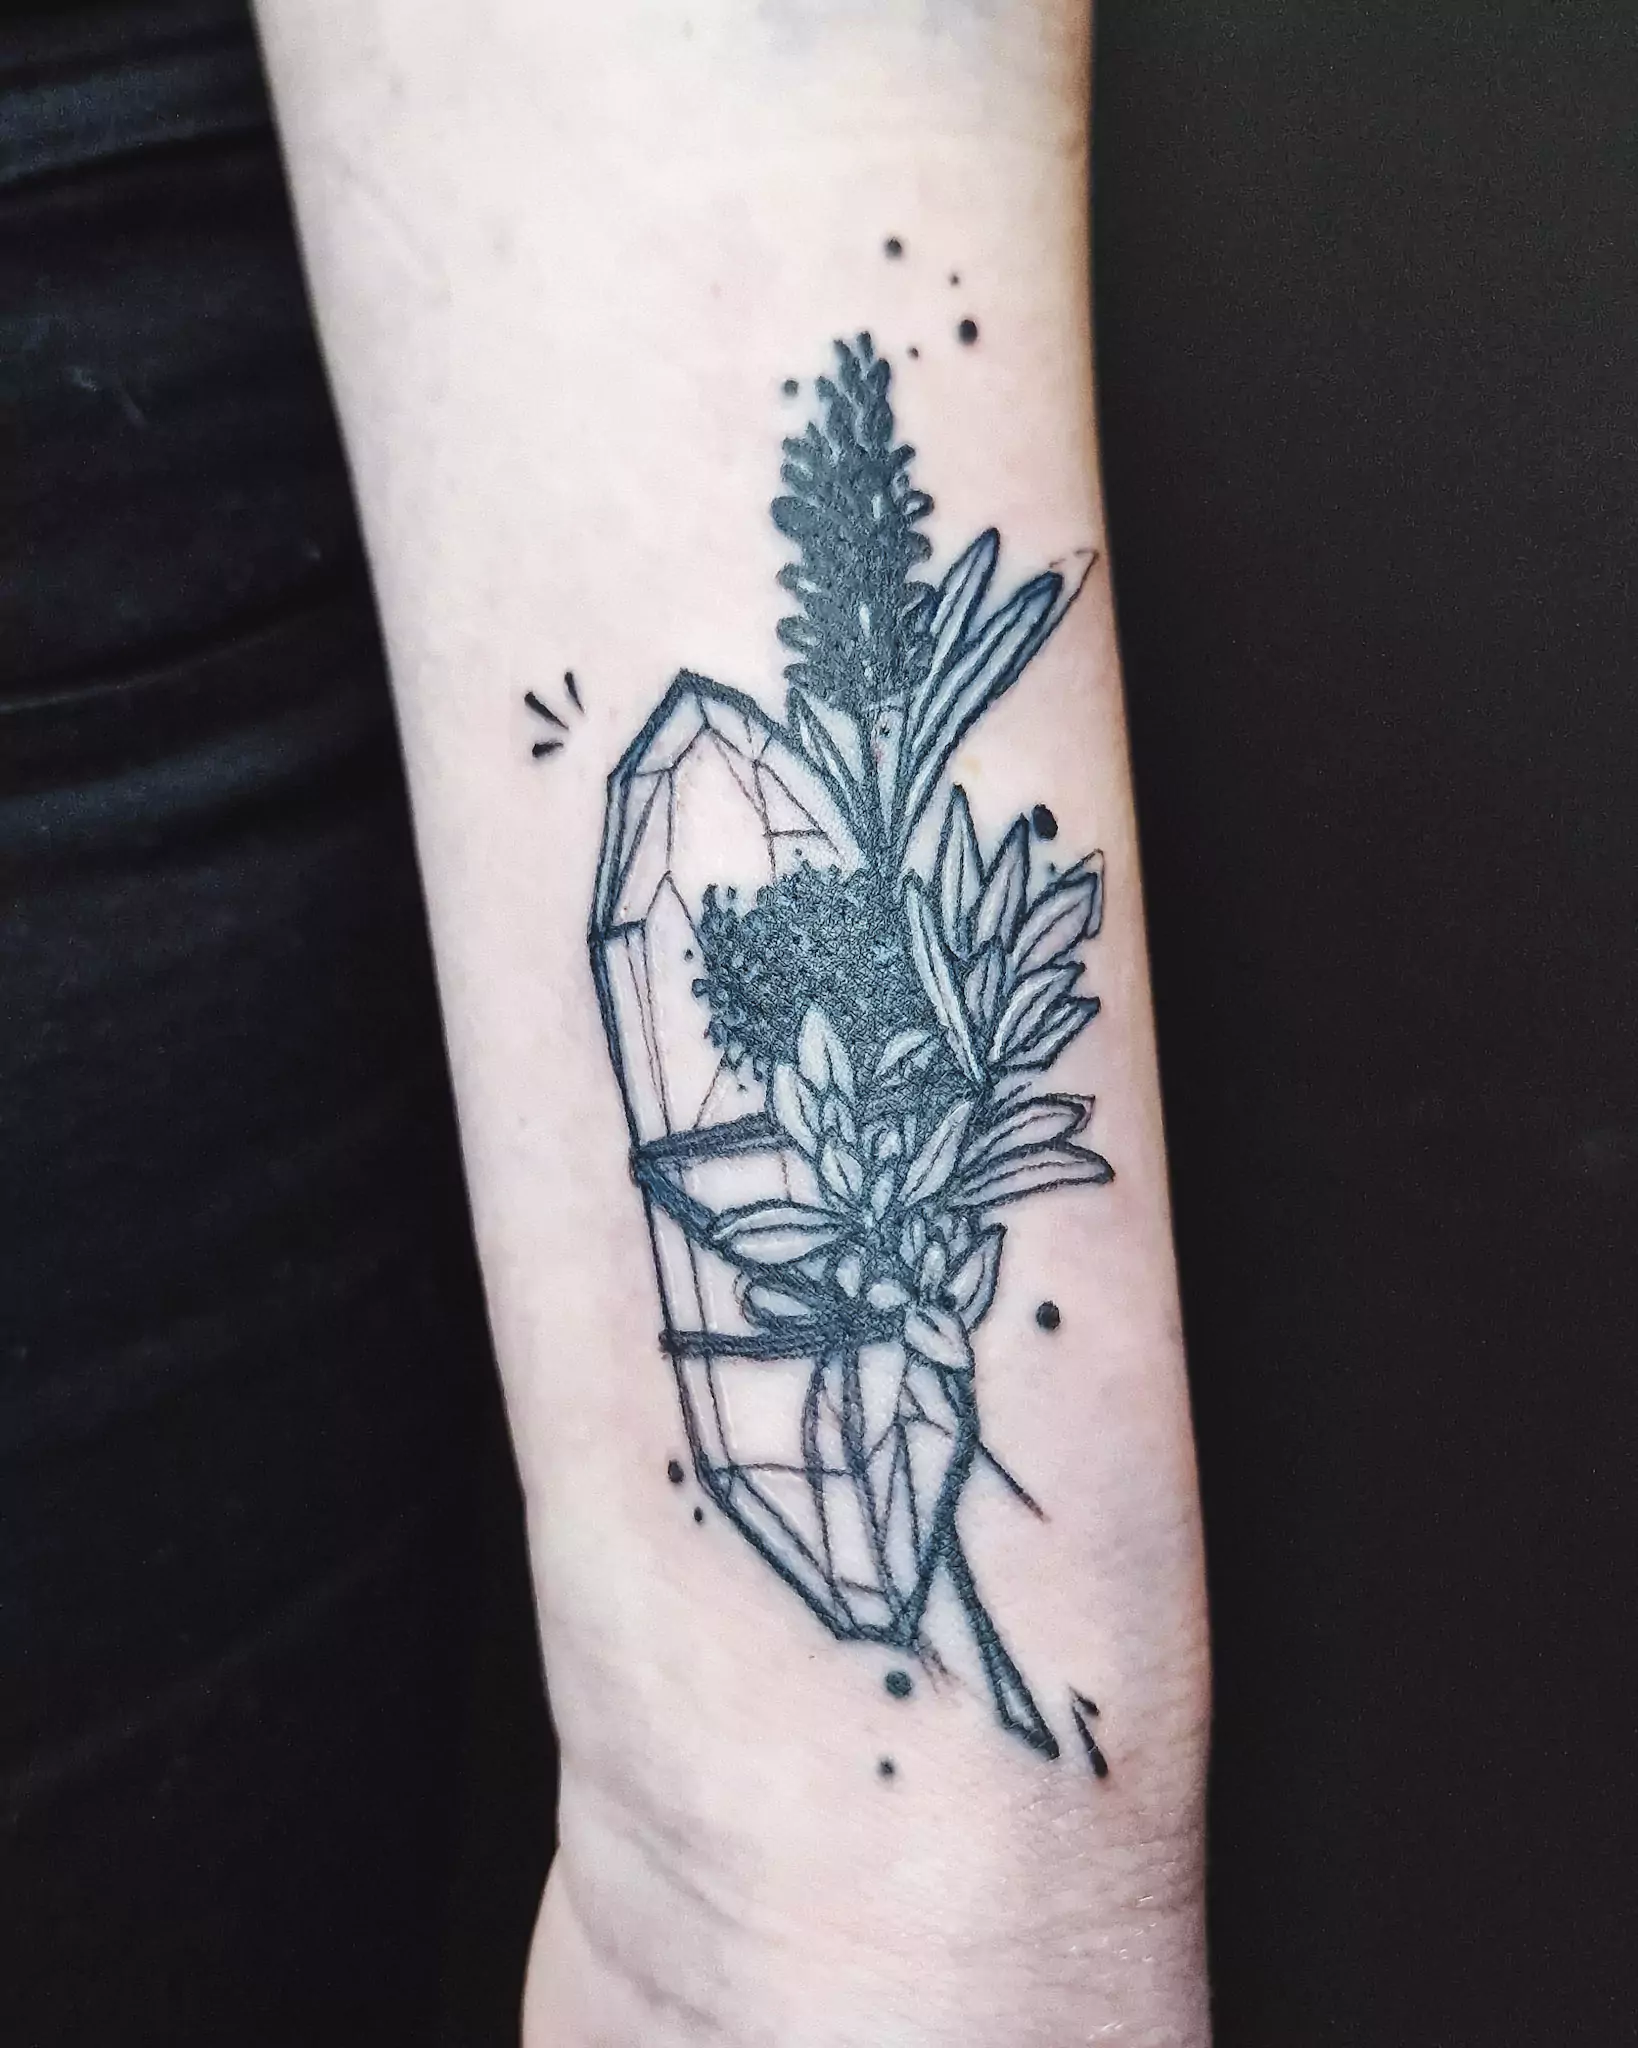 Wicca lavender crystal tattoo